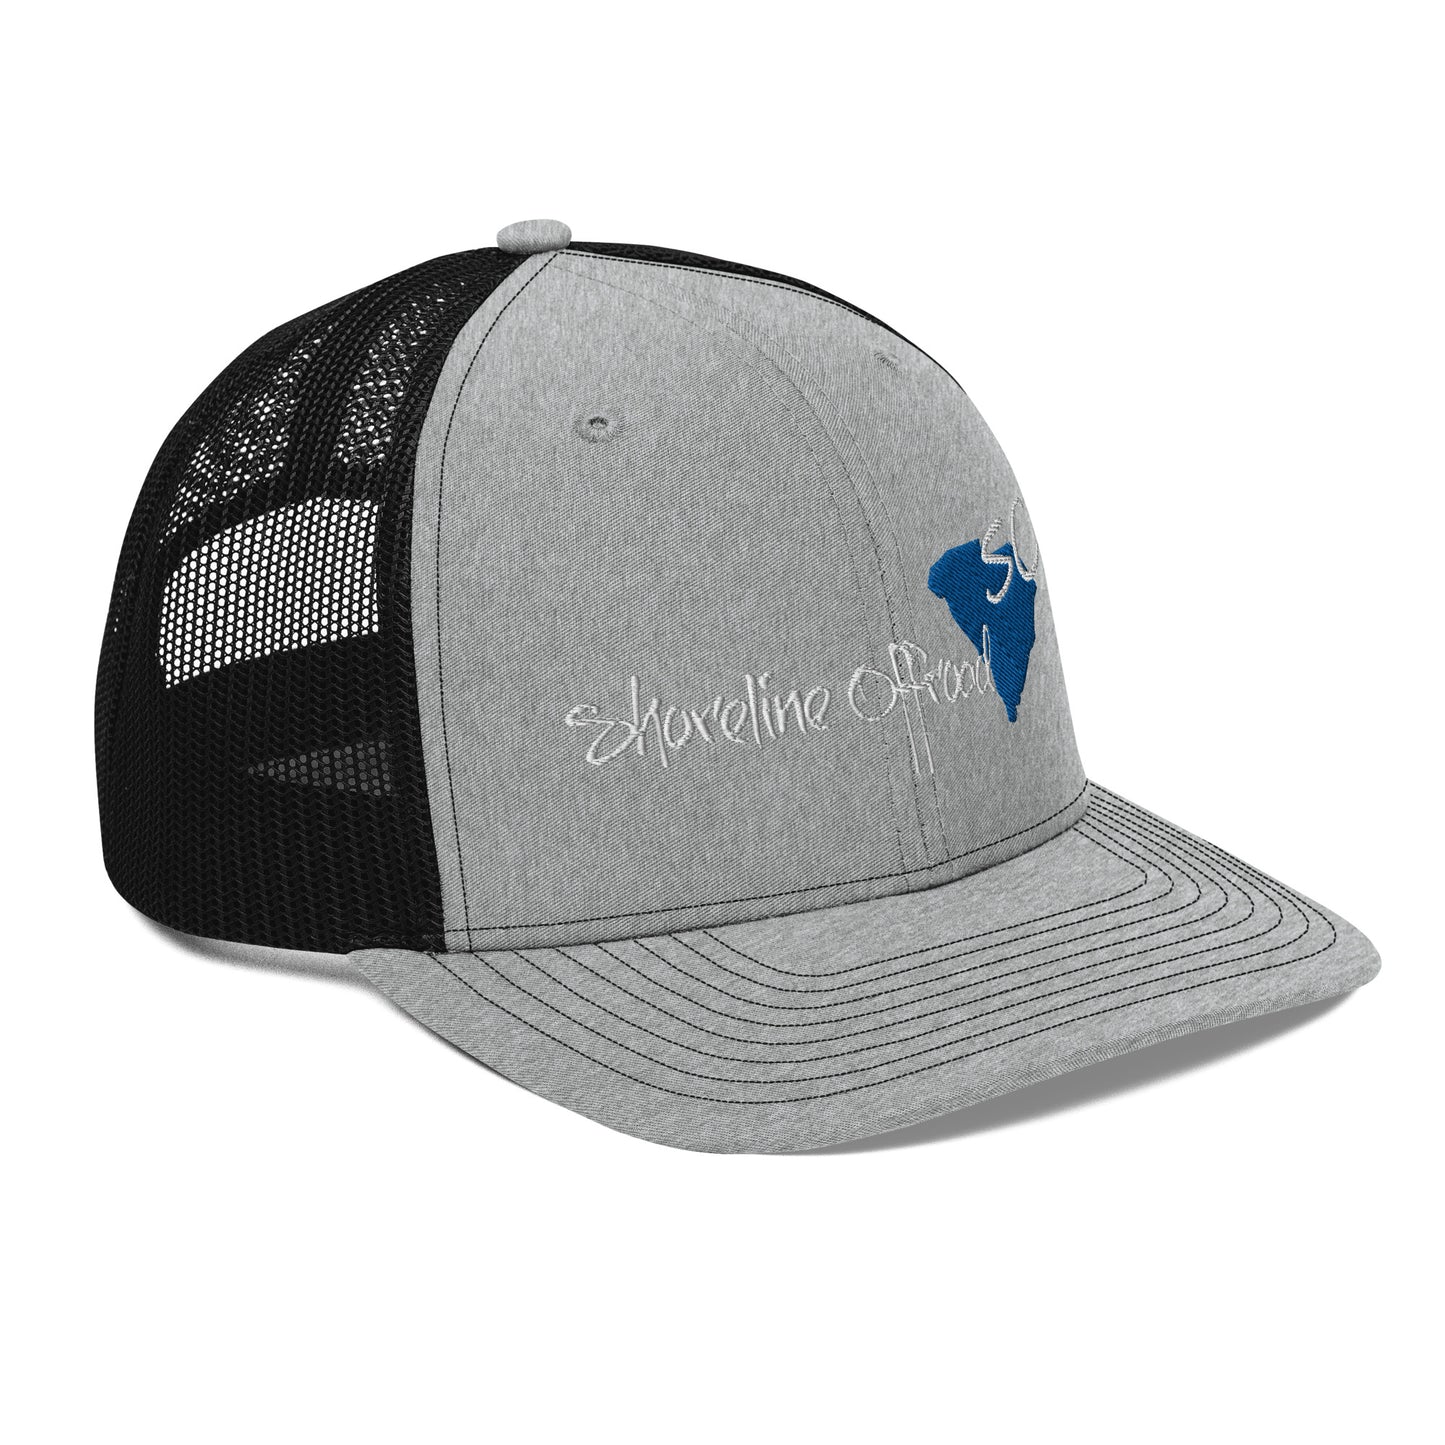 a gray and black trucker hat with a blue bull embroidered on the front